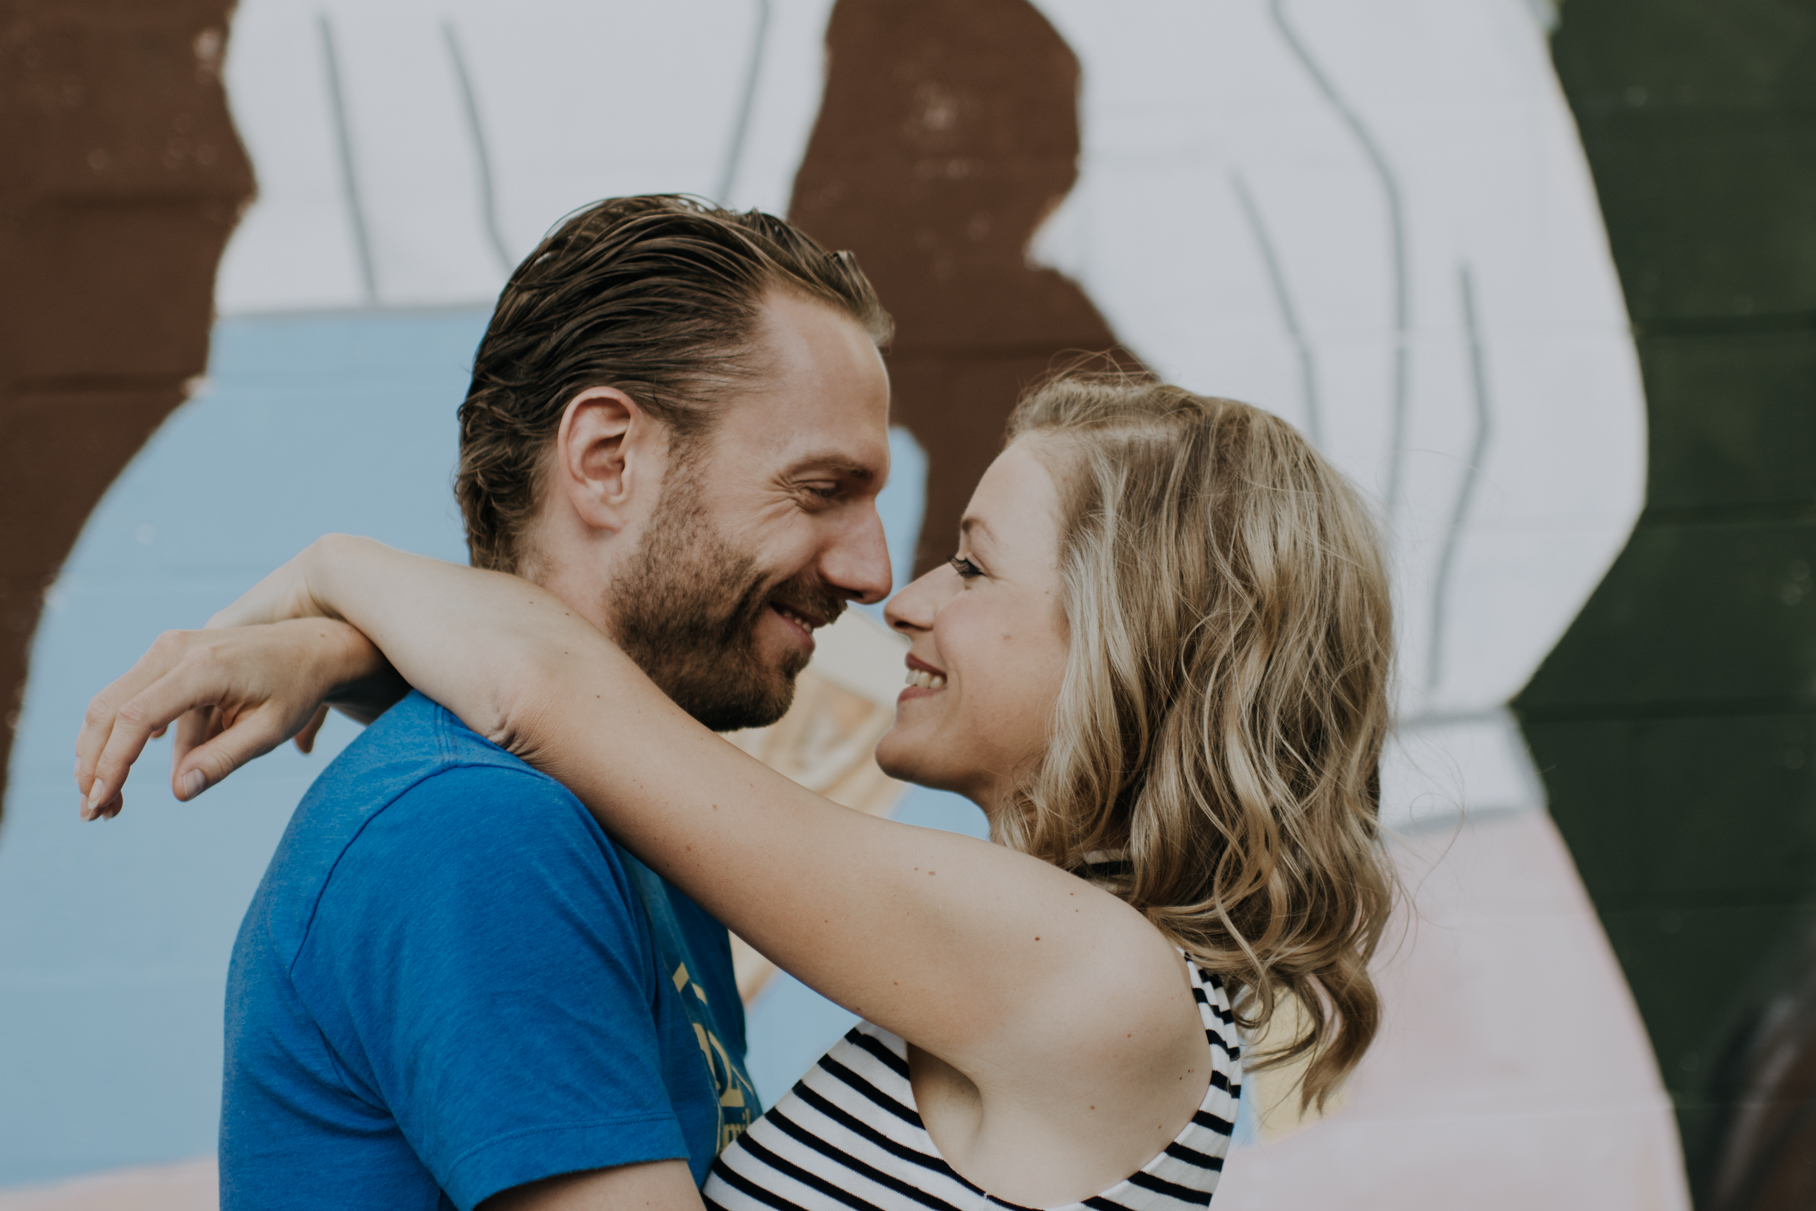 tampa mural shoot | freehearted film co | tampa wedding photography | tampa wedding photographer